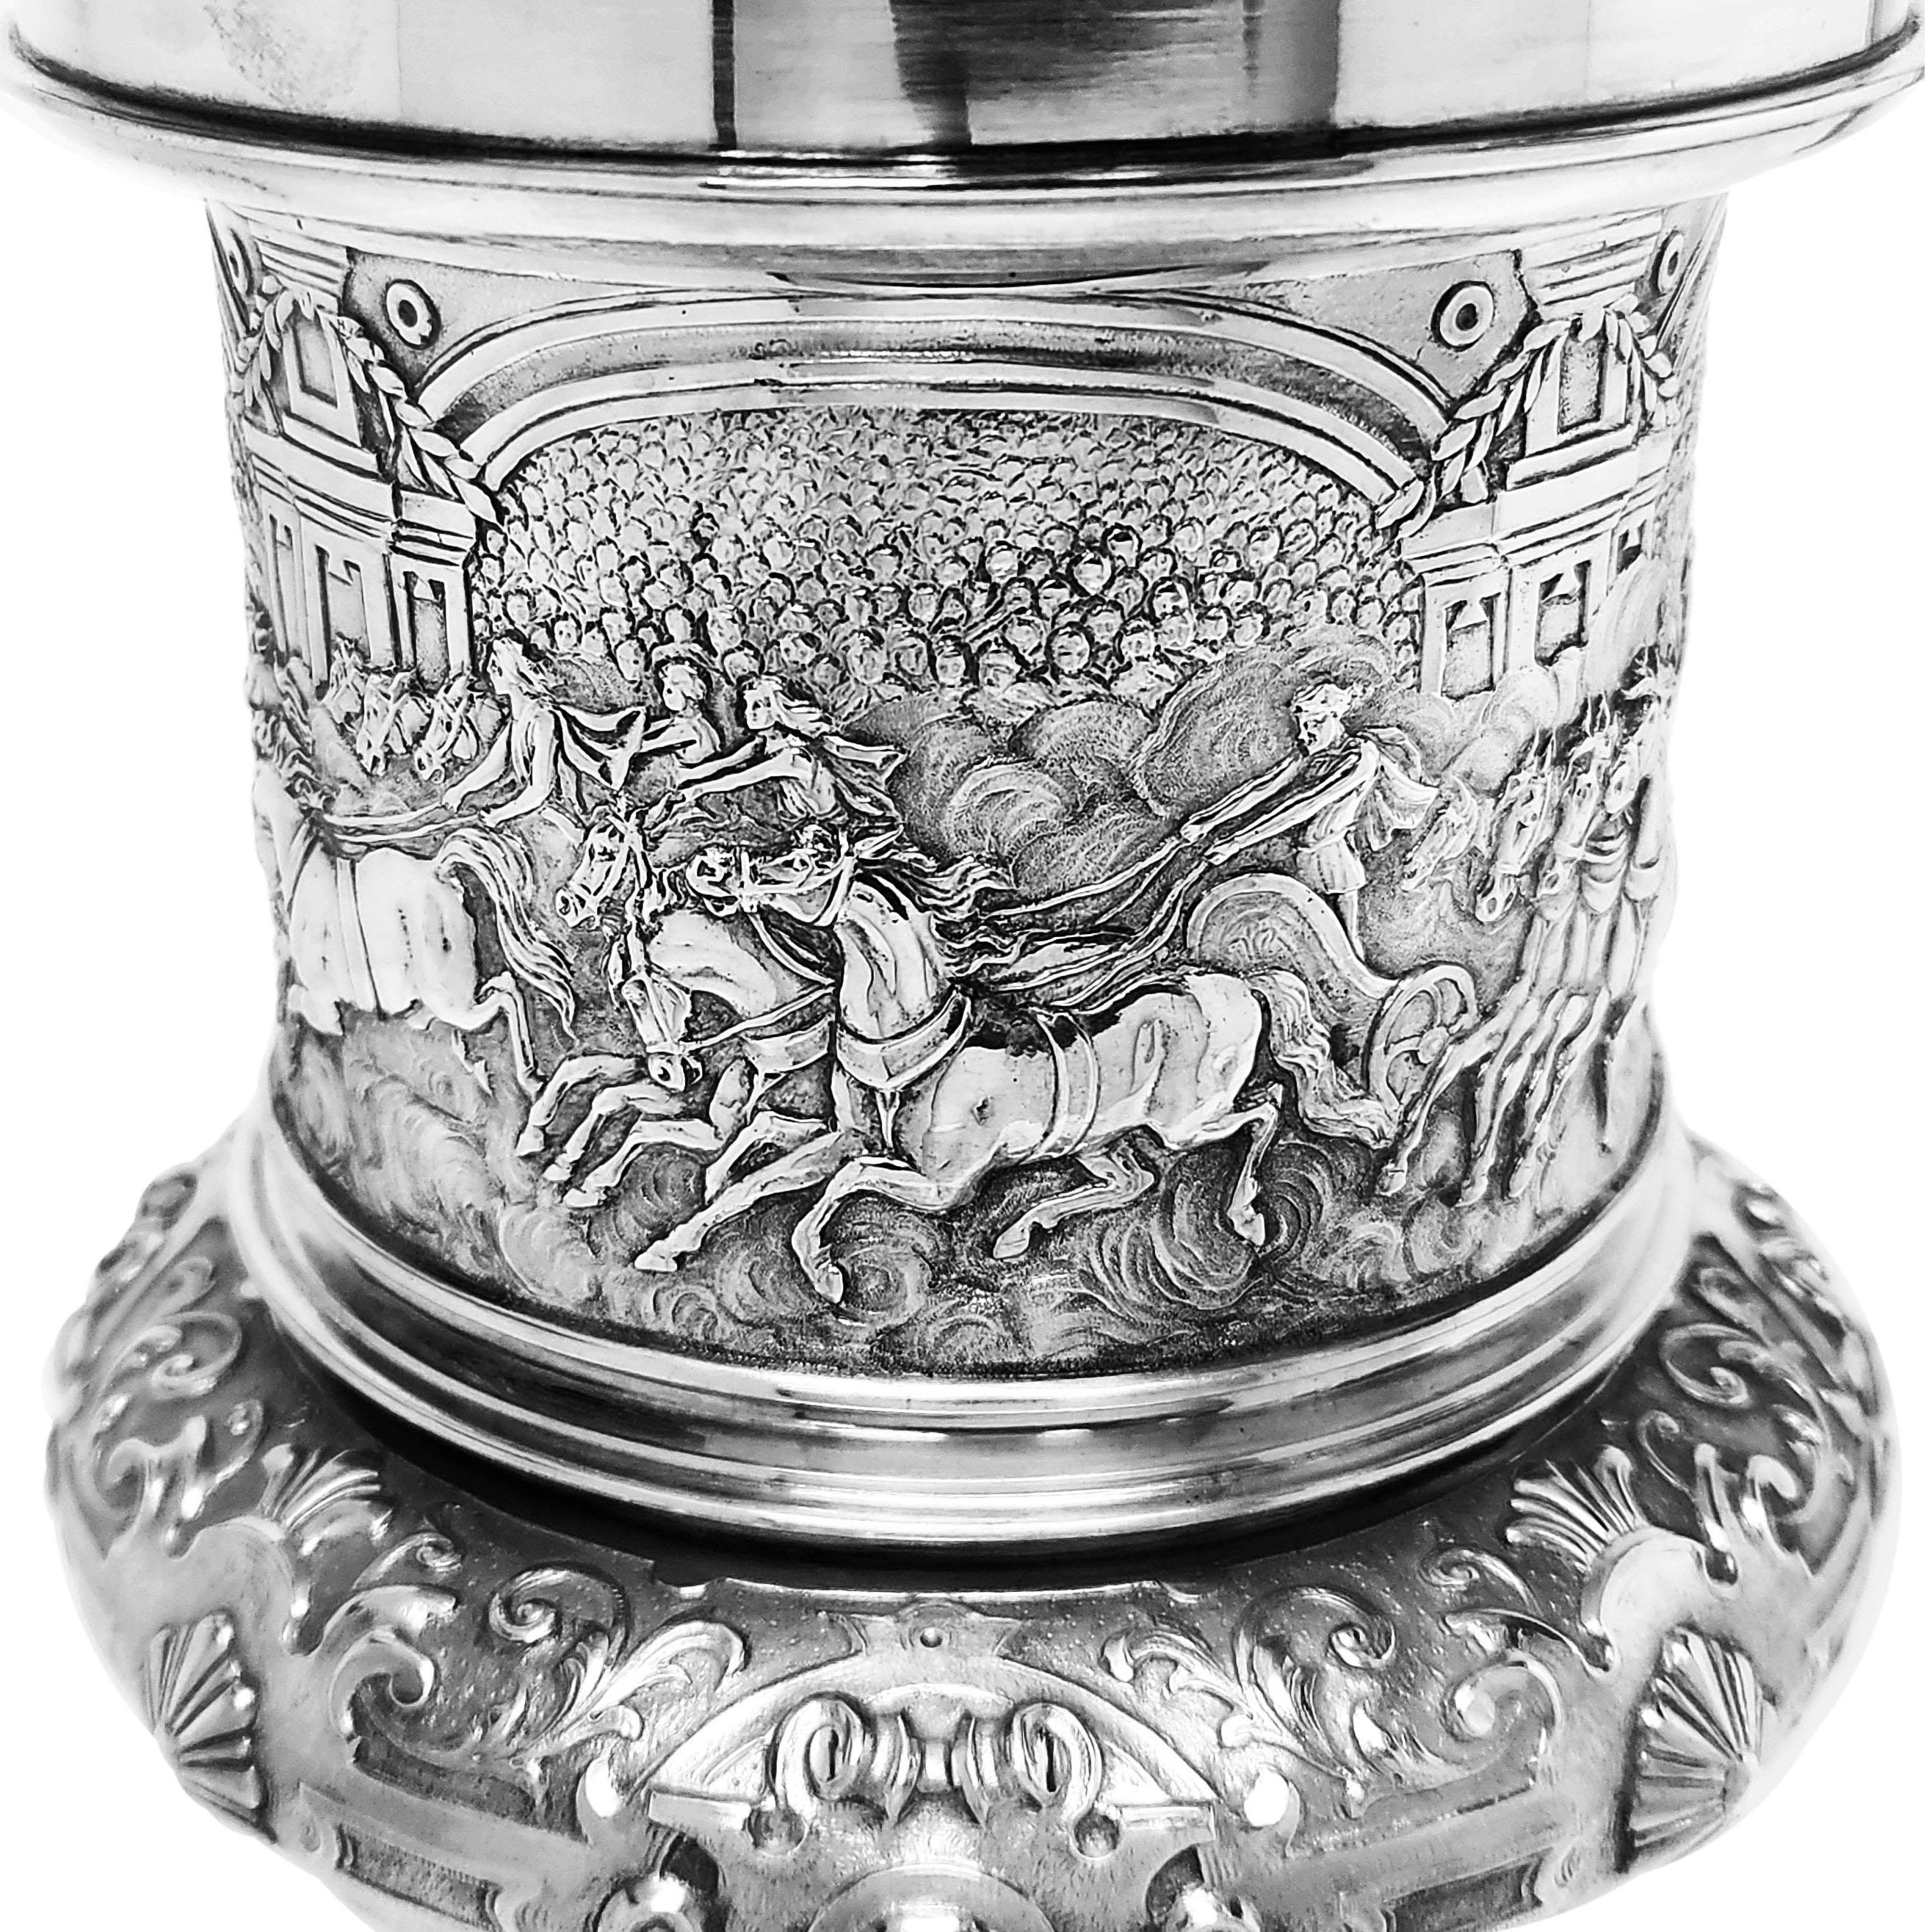 Argent sterling Antique Silver Steeple Cup Lidded Cup & Cover 1902 17th Century Style  en vente